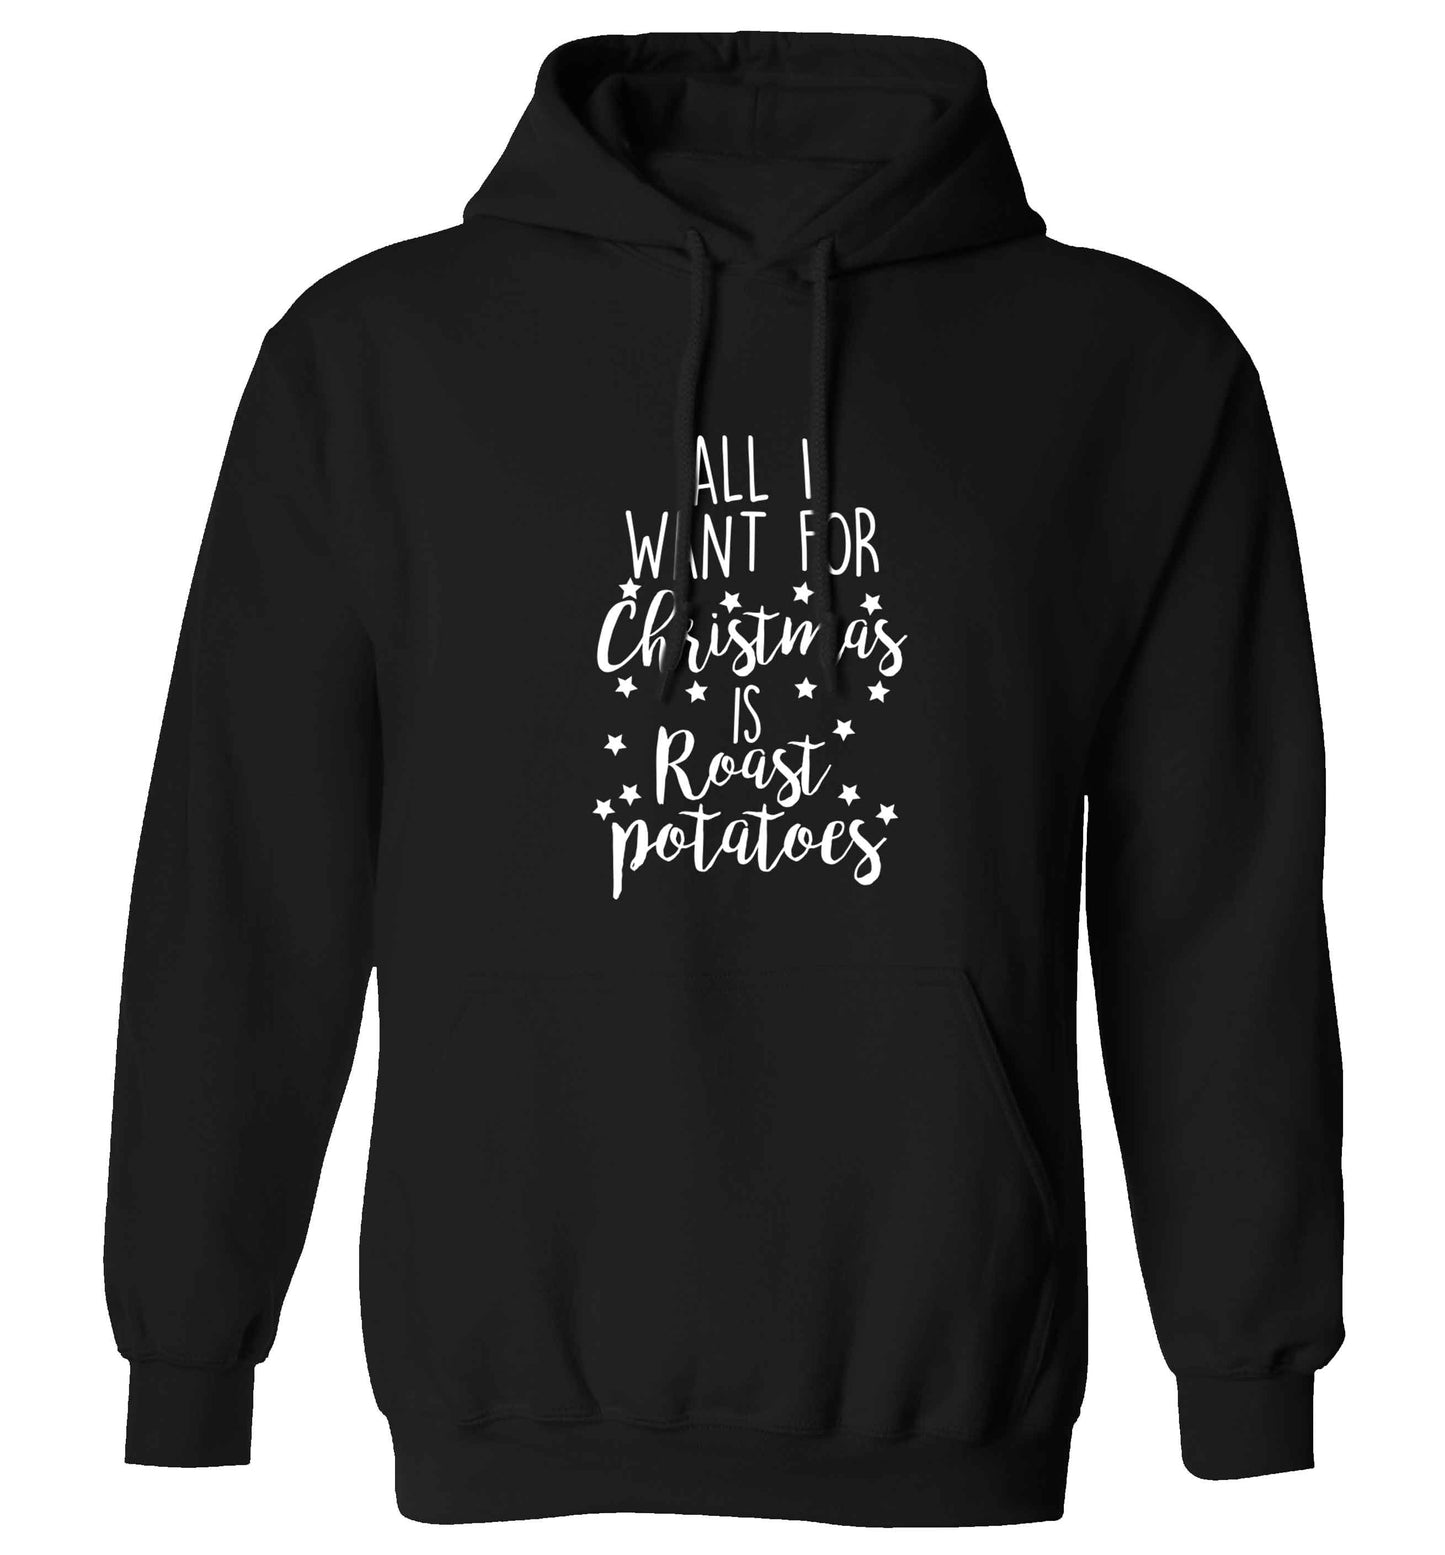 All I want for Christmas is roast potatoes adults unisex black hoodie 2XL